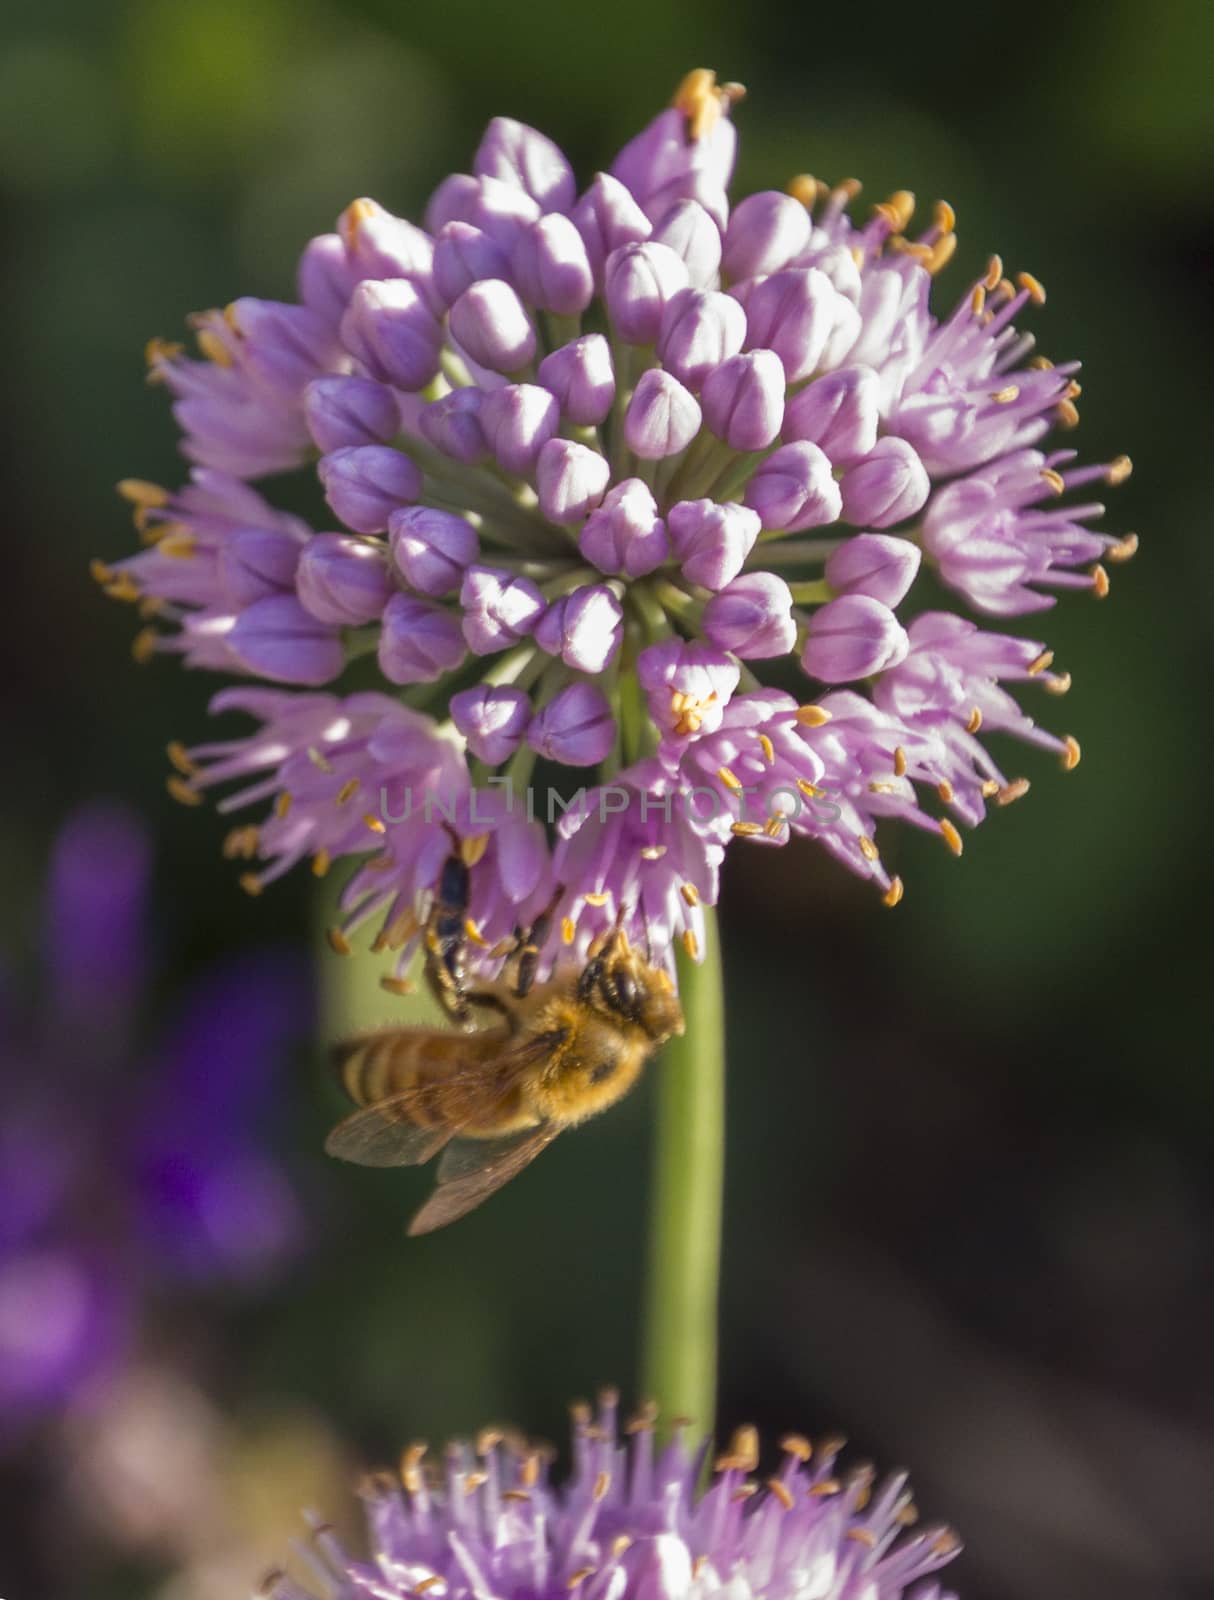 A bee pollinating a purple flower.